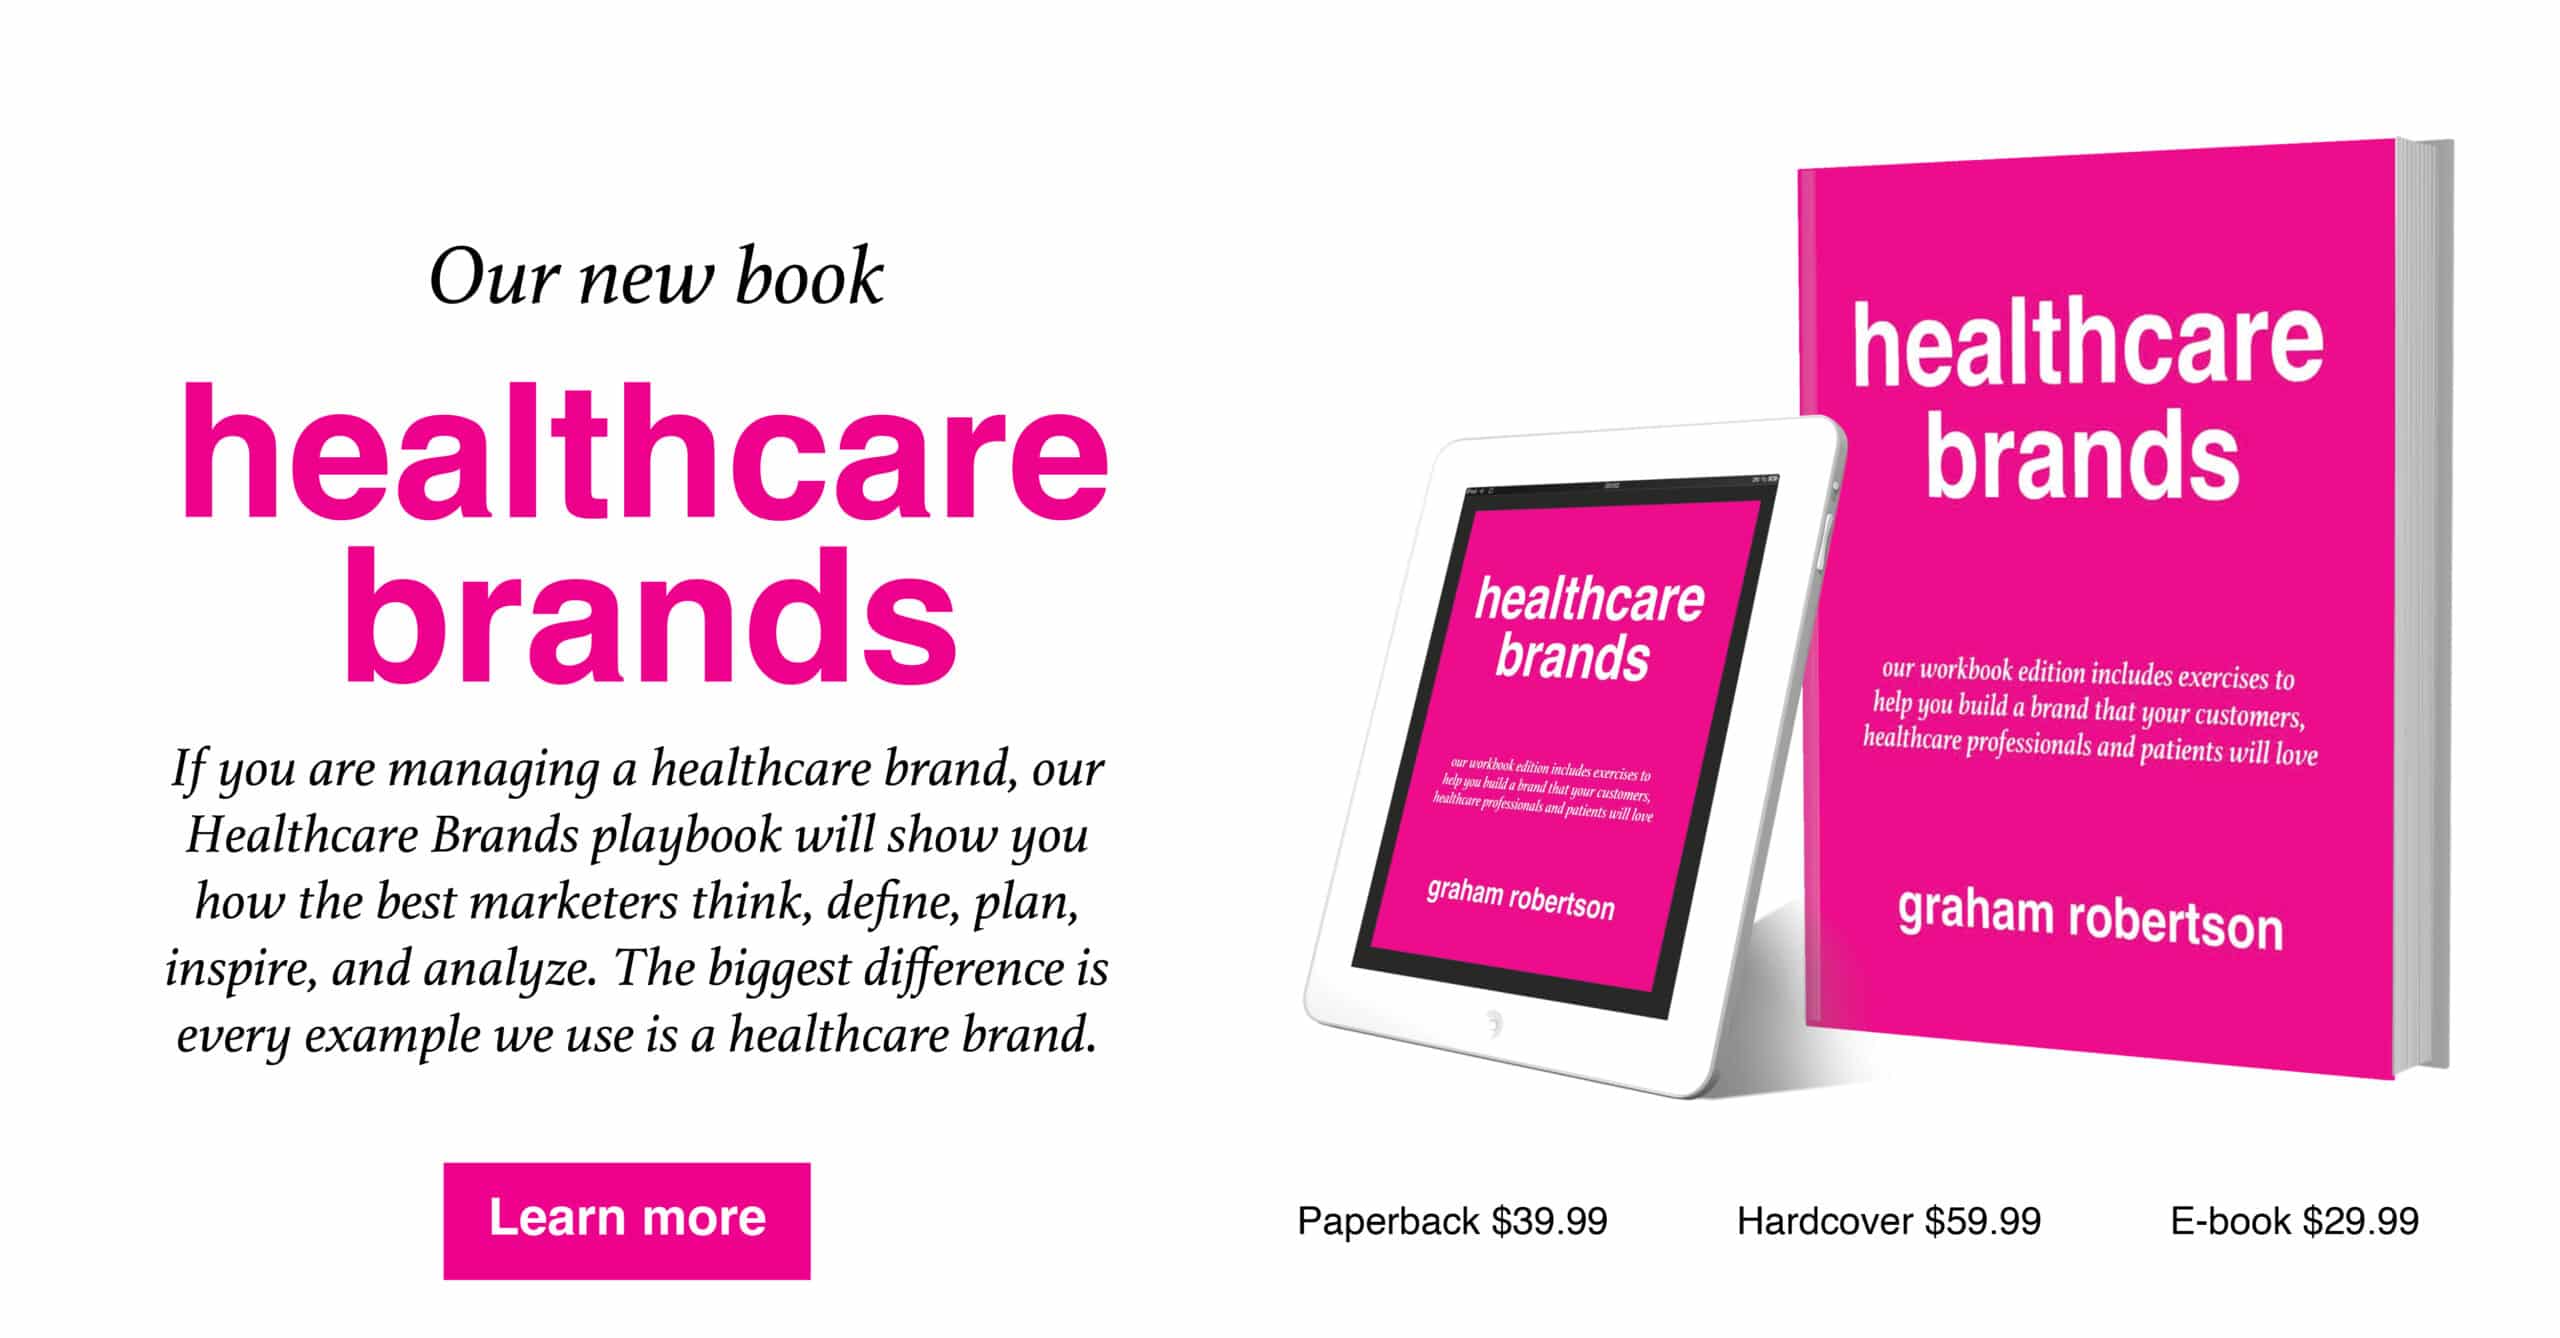 healthcare brands book banner ad